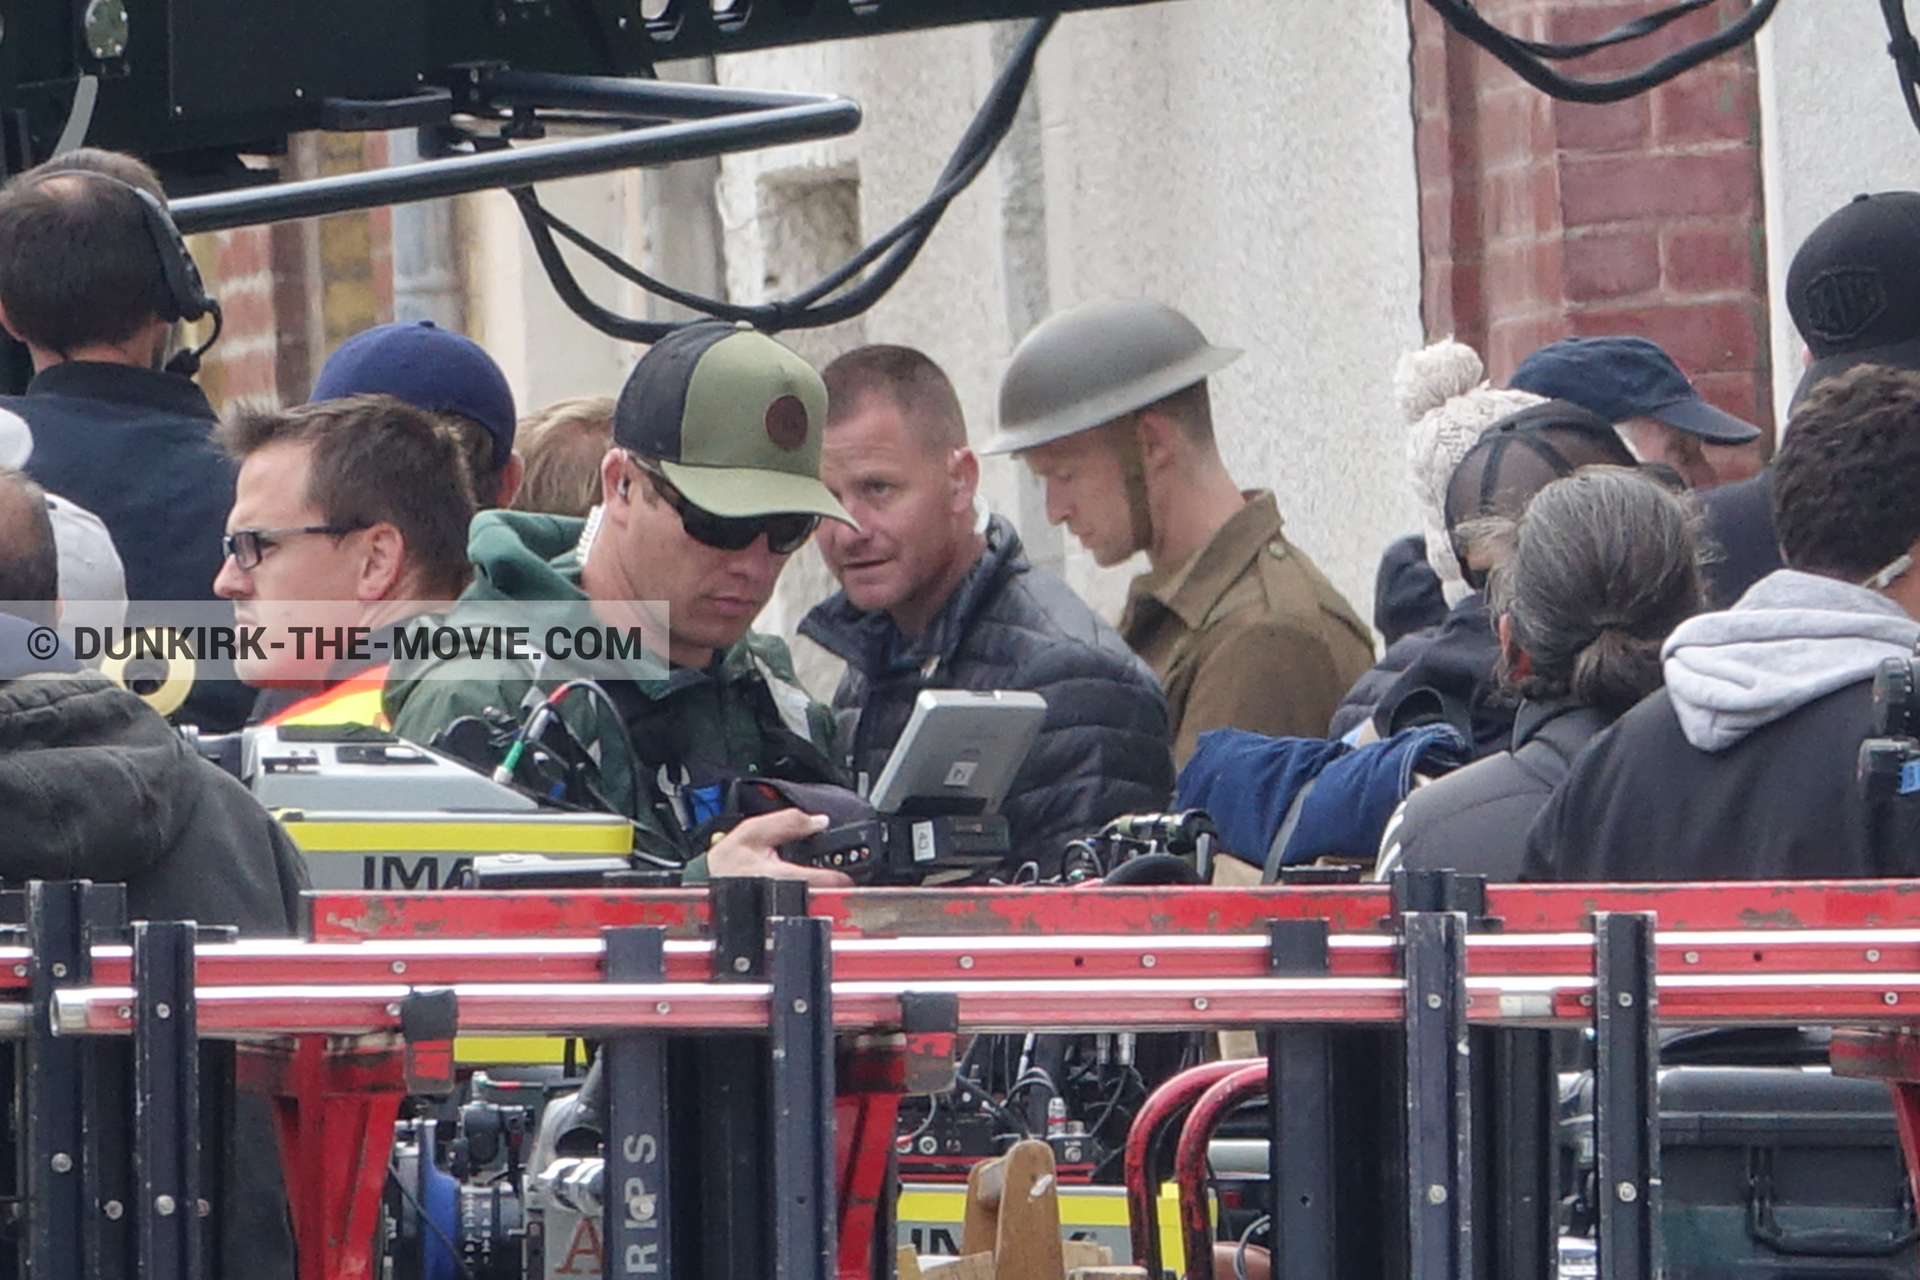 Picture with supernumeraries, Belle Rade street, technical team,  from behind the scene of the Dunkirk movie by Nolan